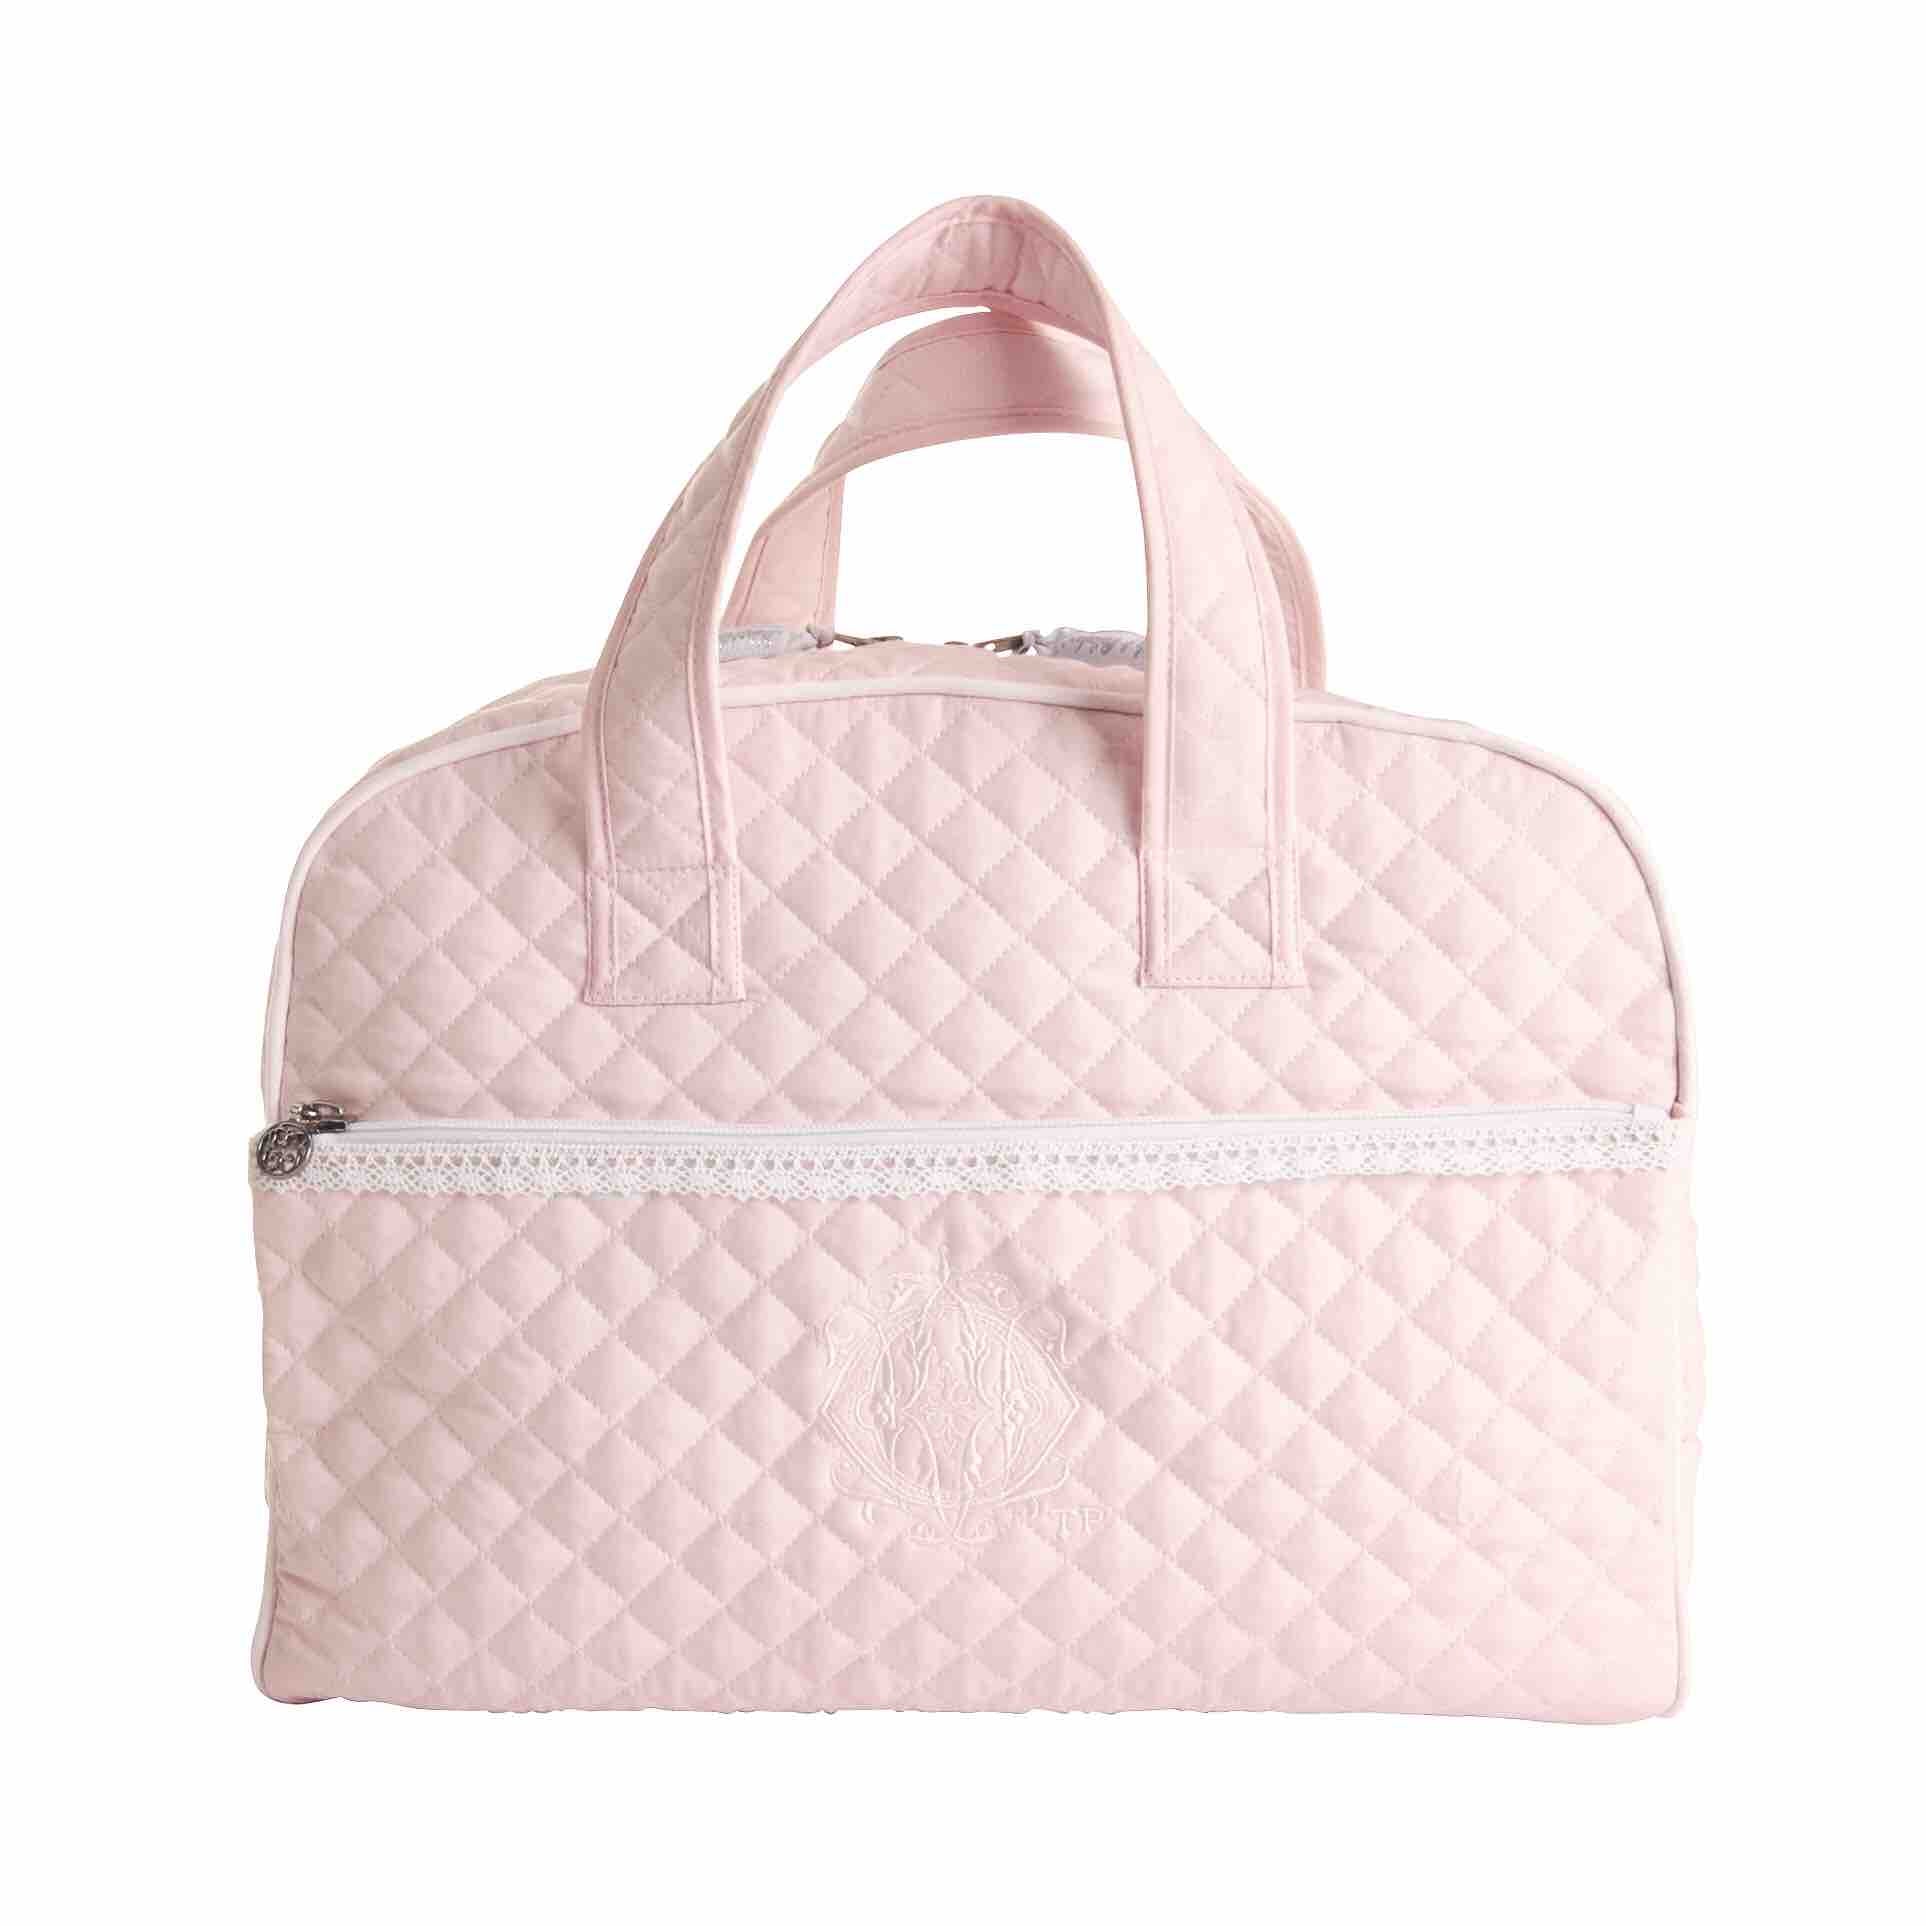 Theophile & Patachou Toiletry Bag - Royal Pink